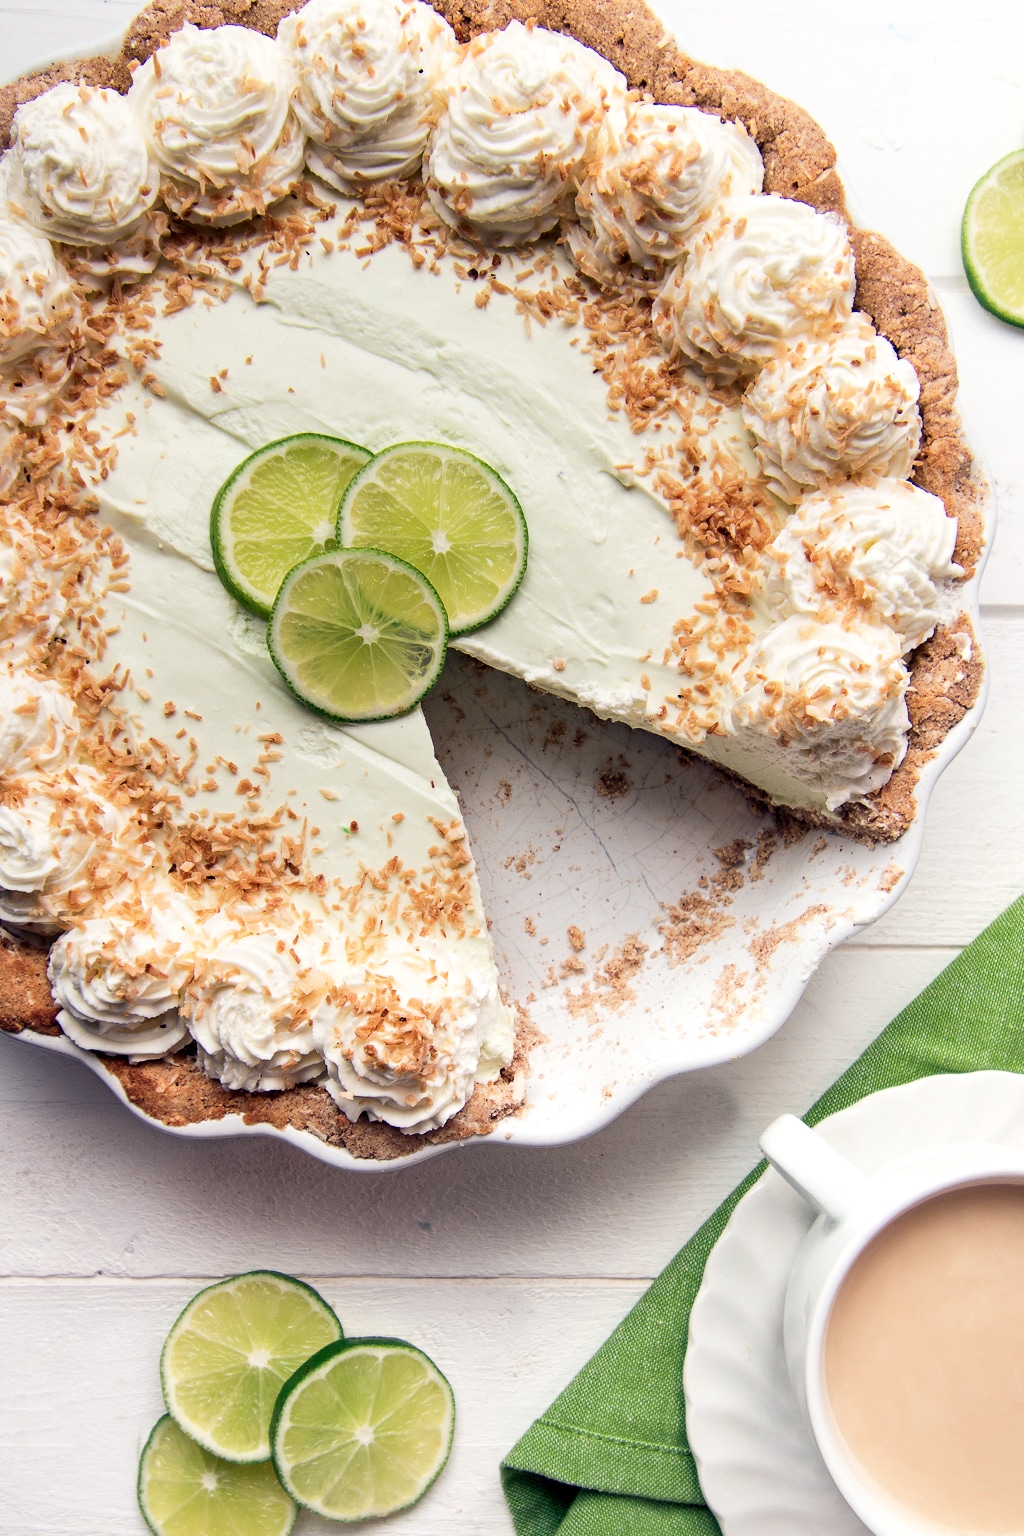 A no bake low carb key lime pie on a white background with slice limes and a white tea cup filled with fresh brewed tea.